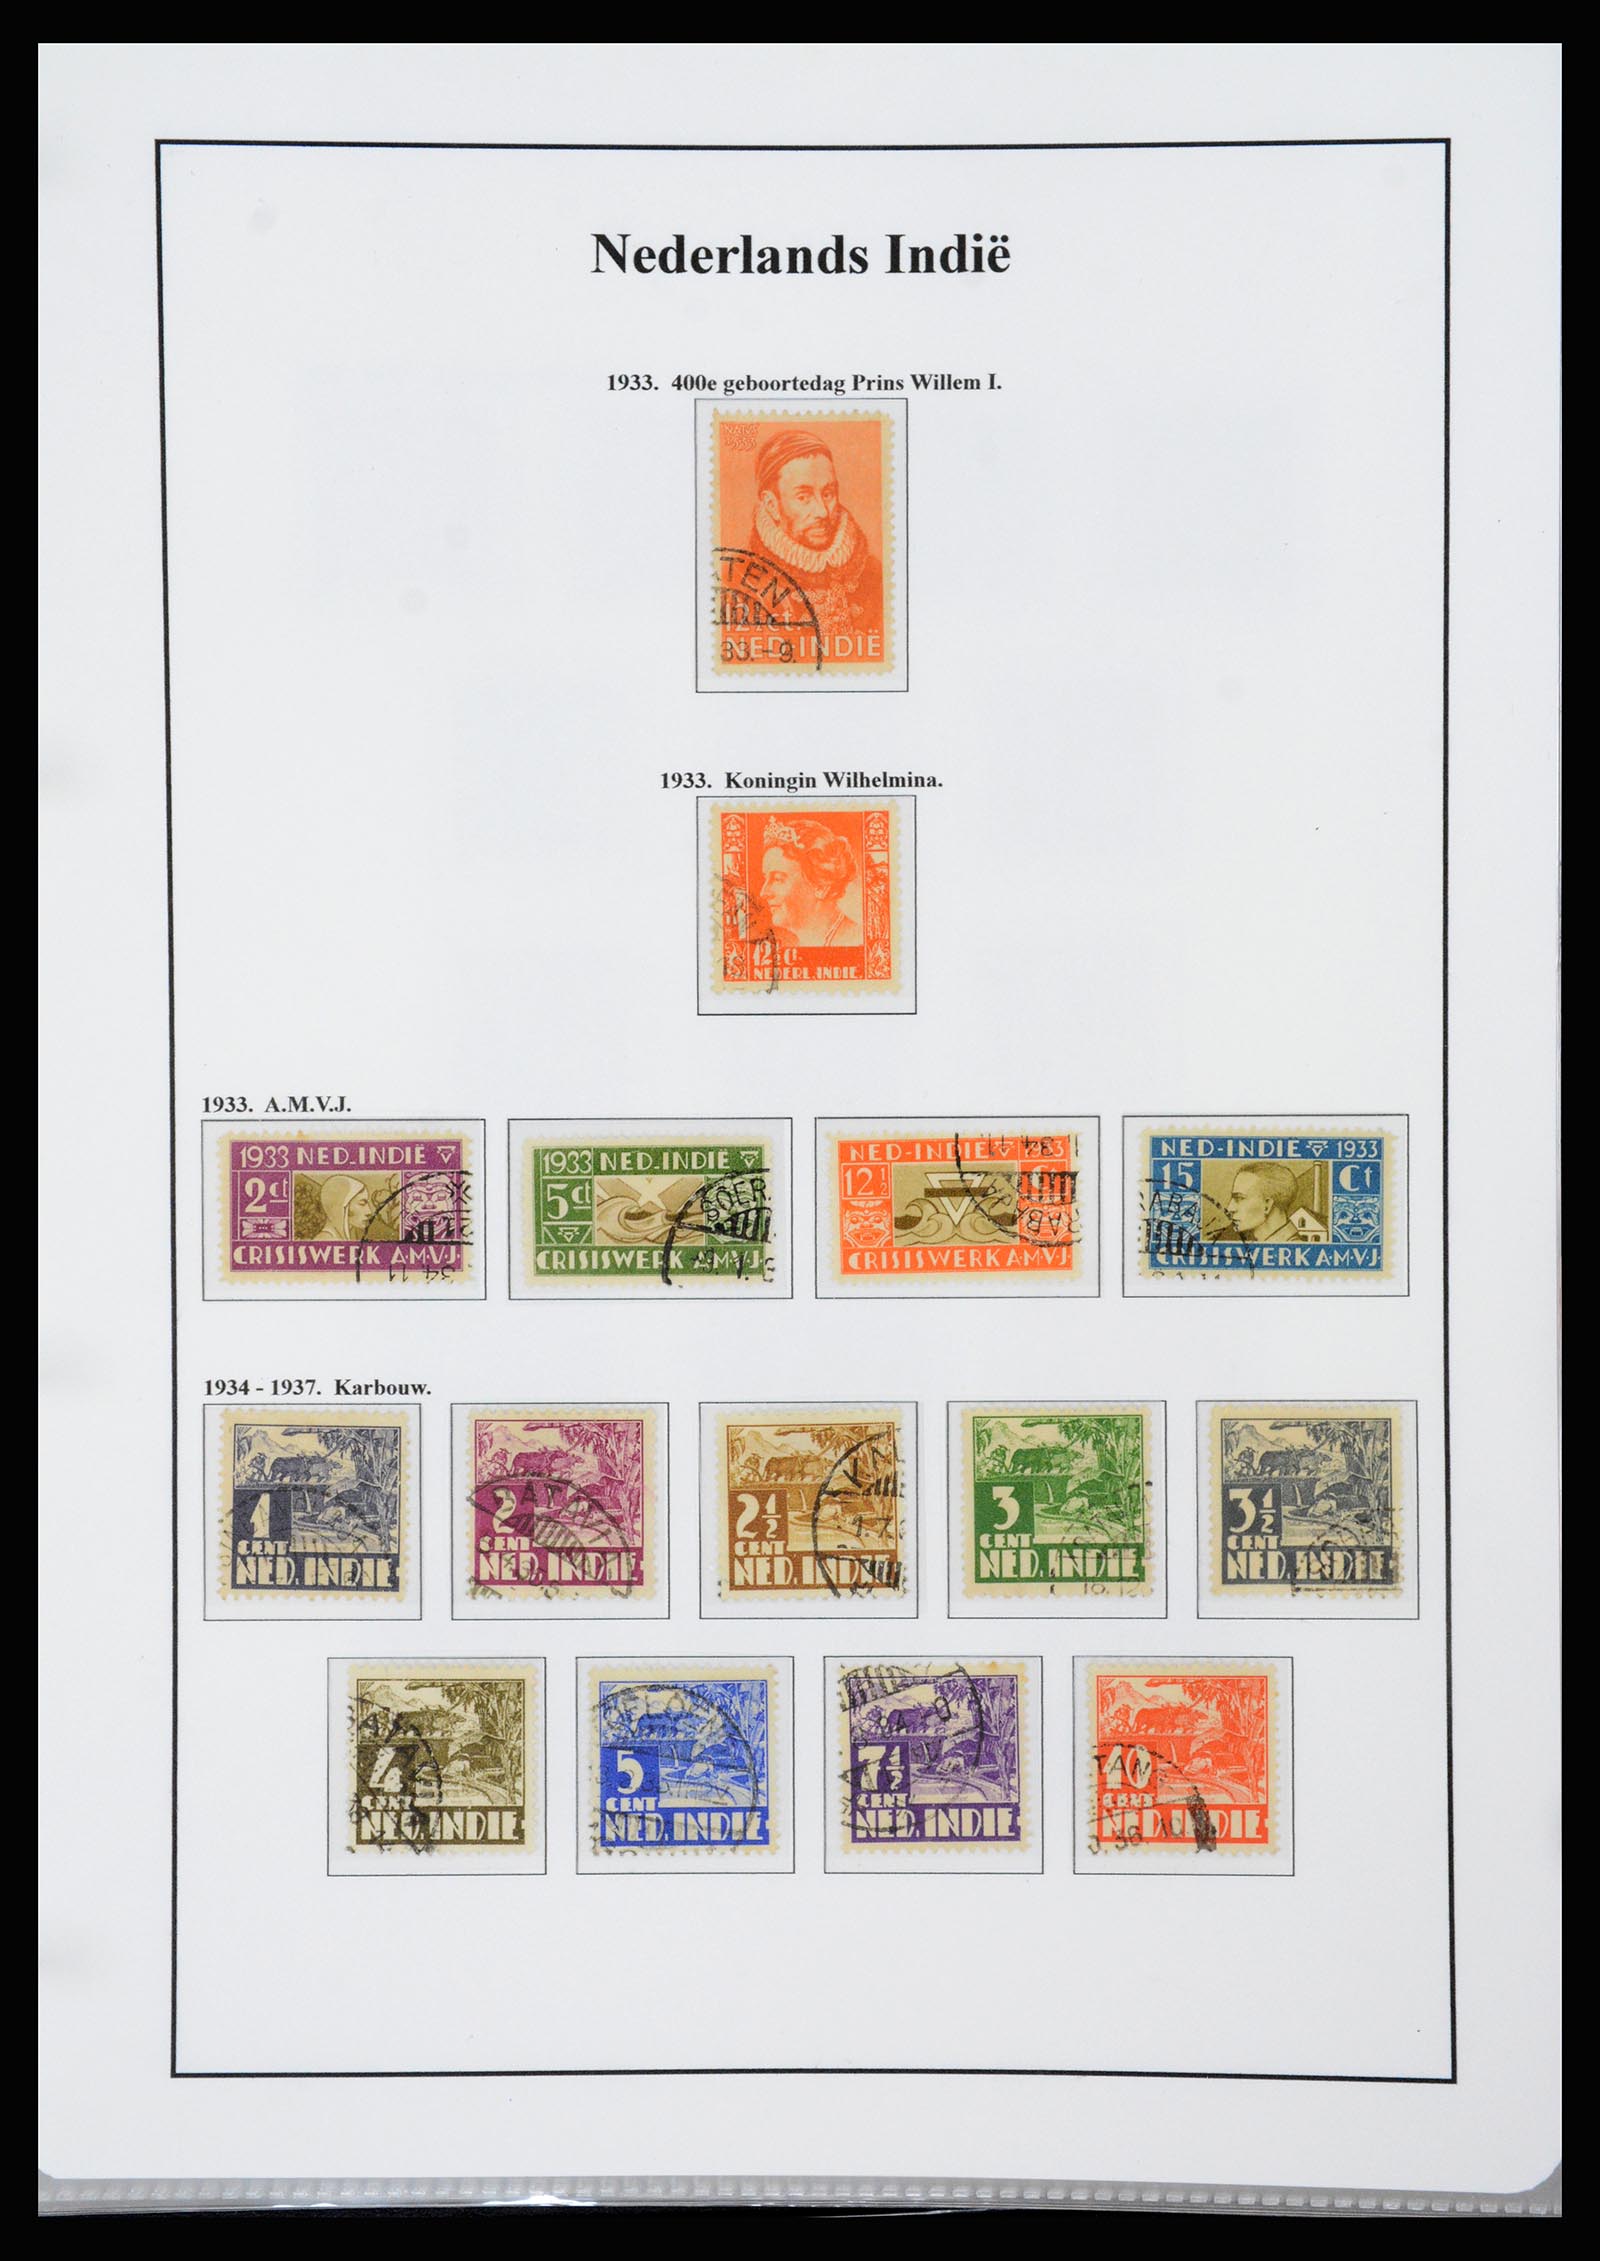 37247 016 - Stamp collection 37247 Dutch east Indies 1864-1949.